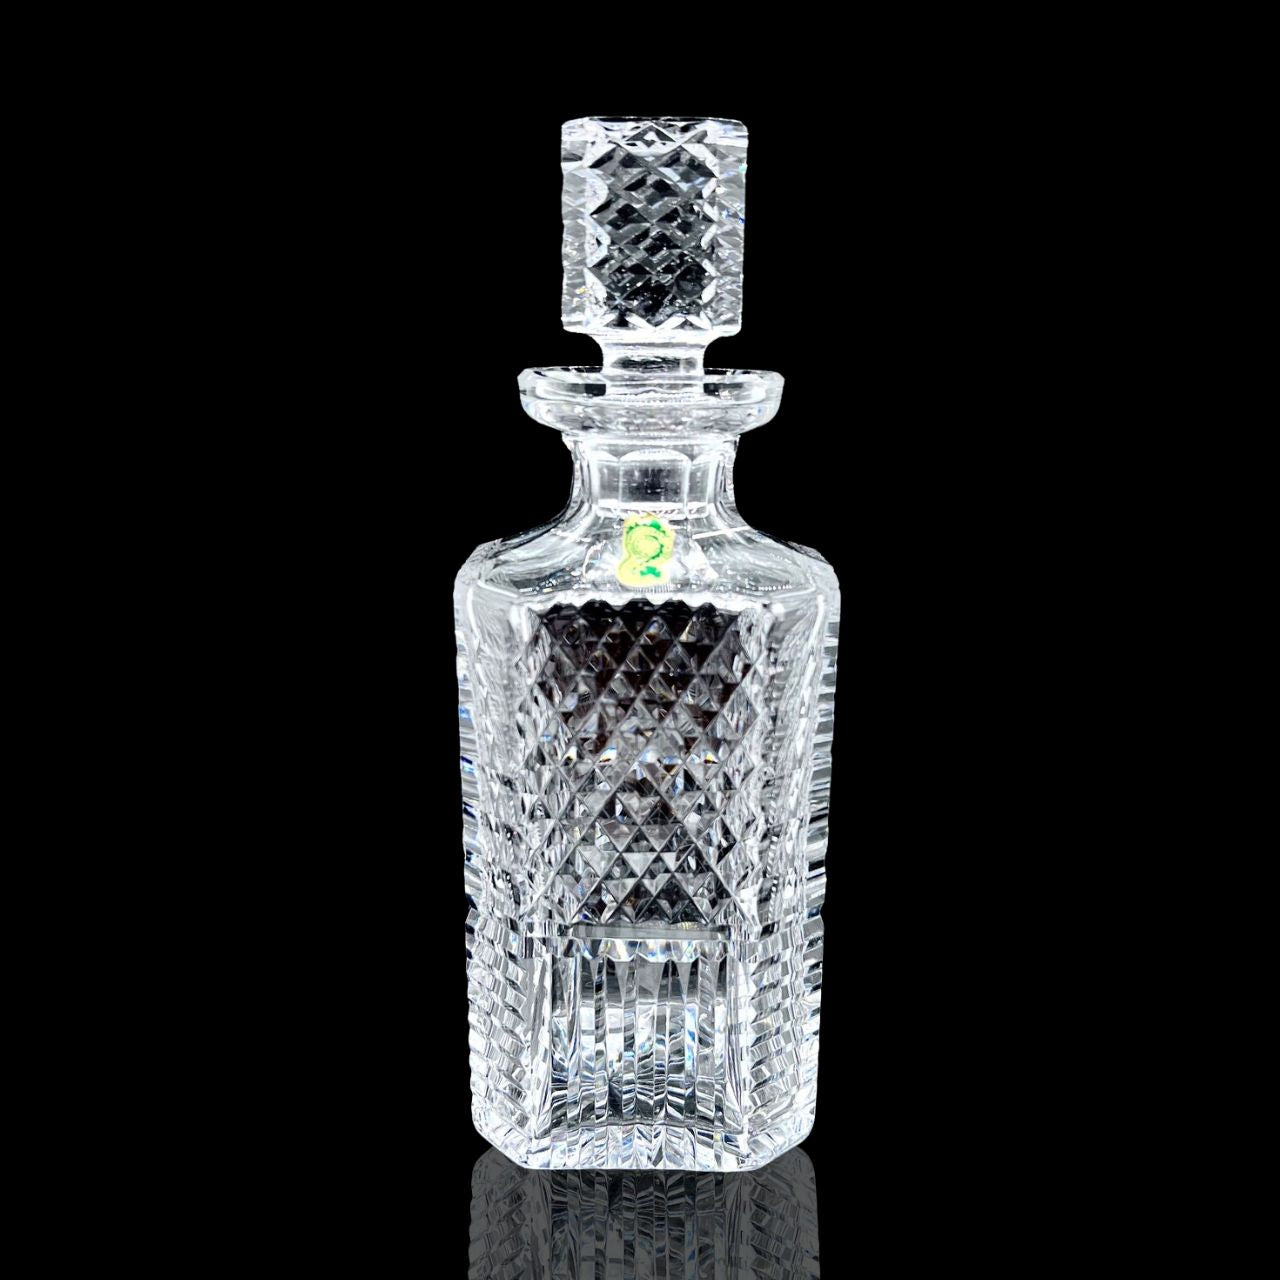 Waterford Crystal Square Spirit Decanter  Proudly pour your favourite single malt from this charming Waterford 26oz Square Decanter and become a connoisseur. With its striking square profile, this traditional crystal whiskey decanter will look magnificent as it highlights the rich colour of its contents, radiating luxury and excellence as you entertain guests or savour something that is too good to share.